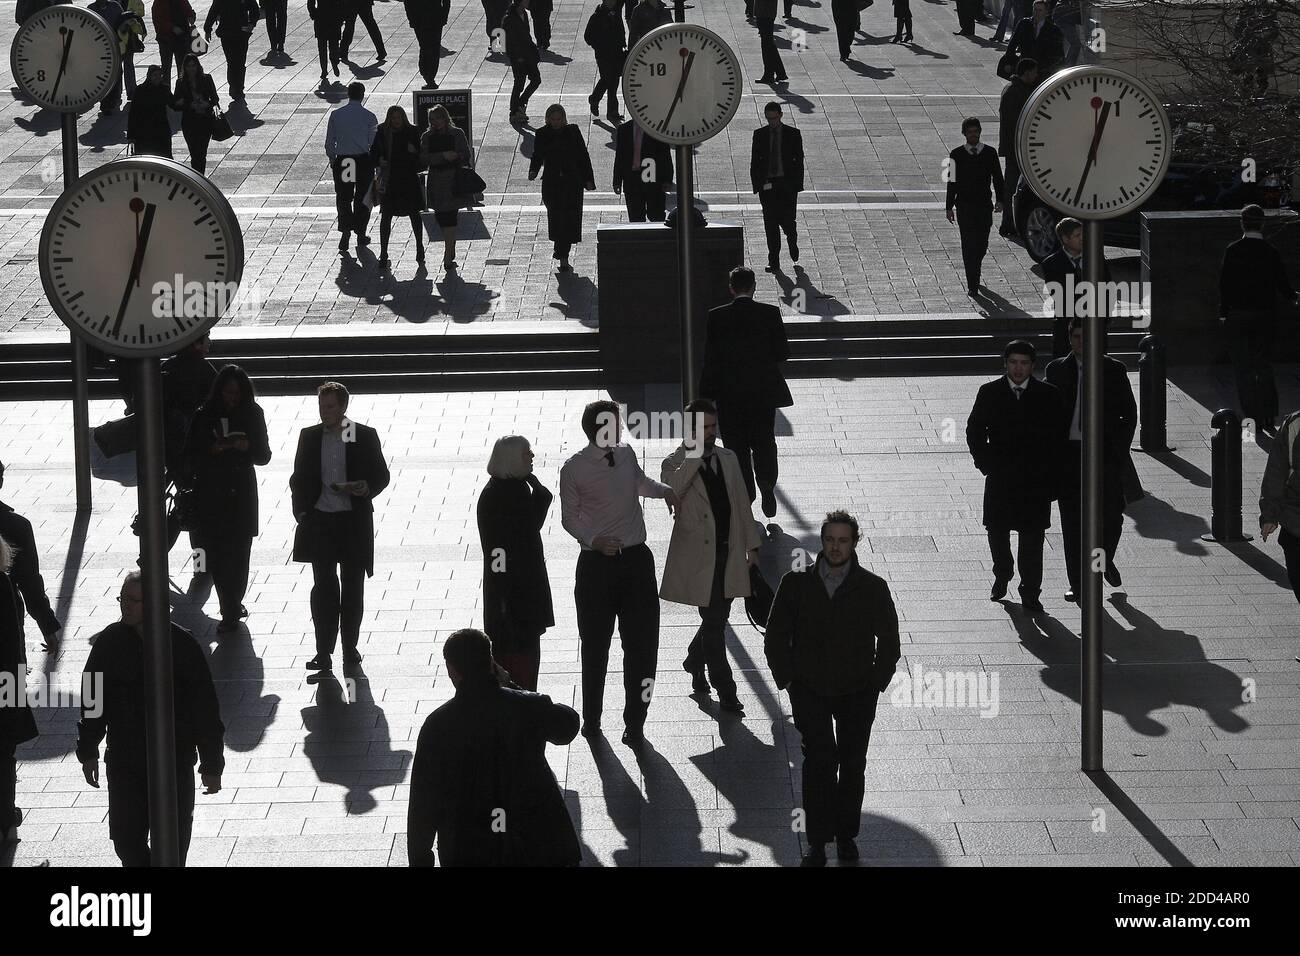 Shadows and silhouettes of pedestrians walking through Reuters Plaza, Canary Wharf, London, UK Stock Photo